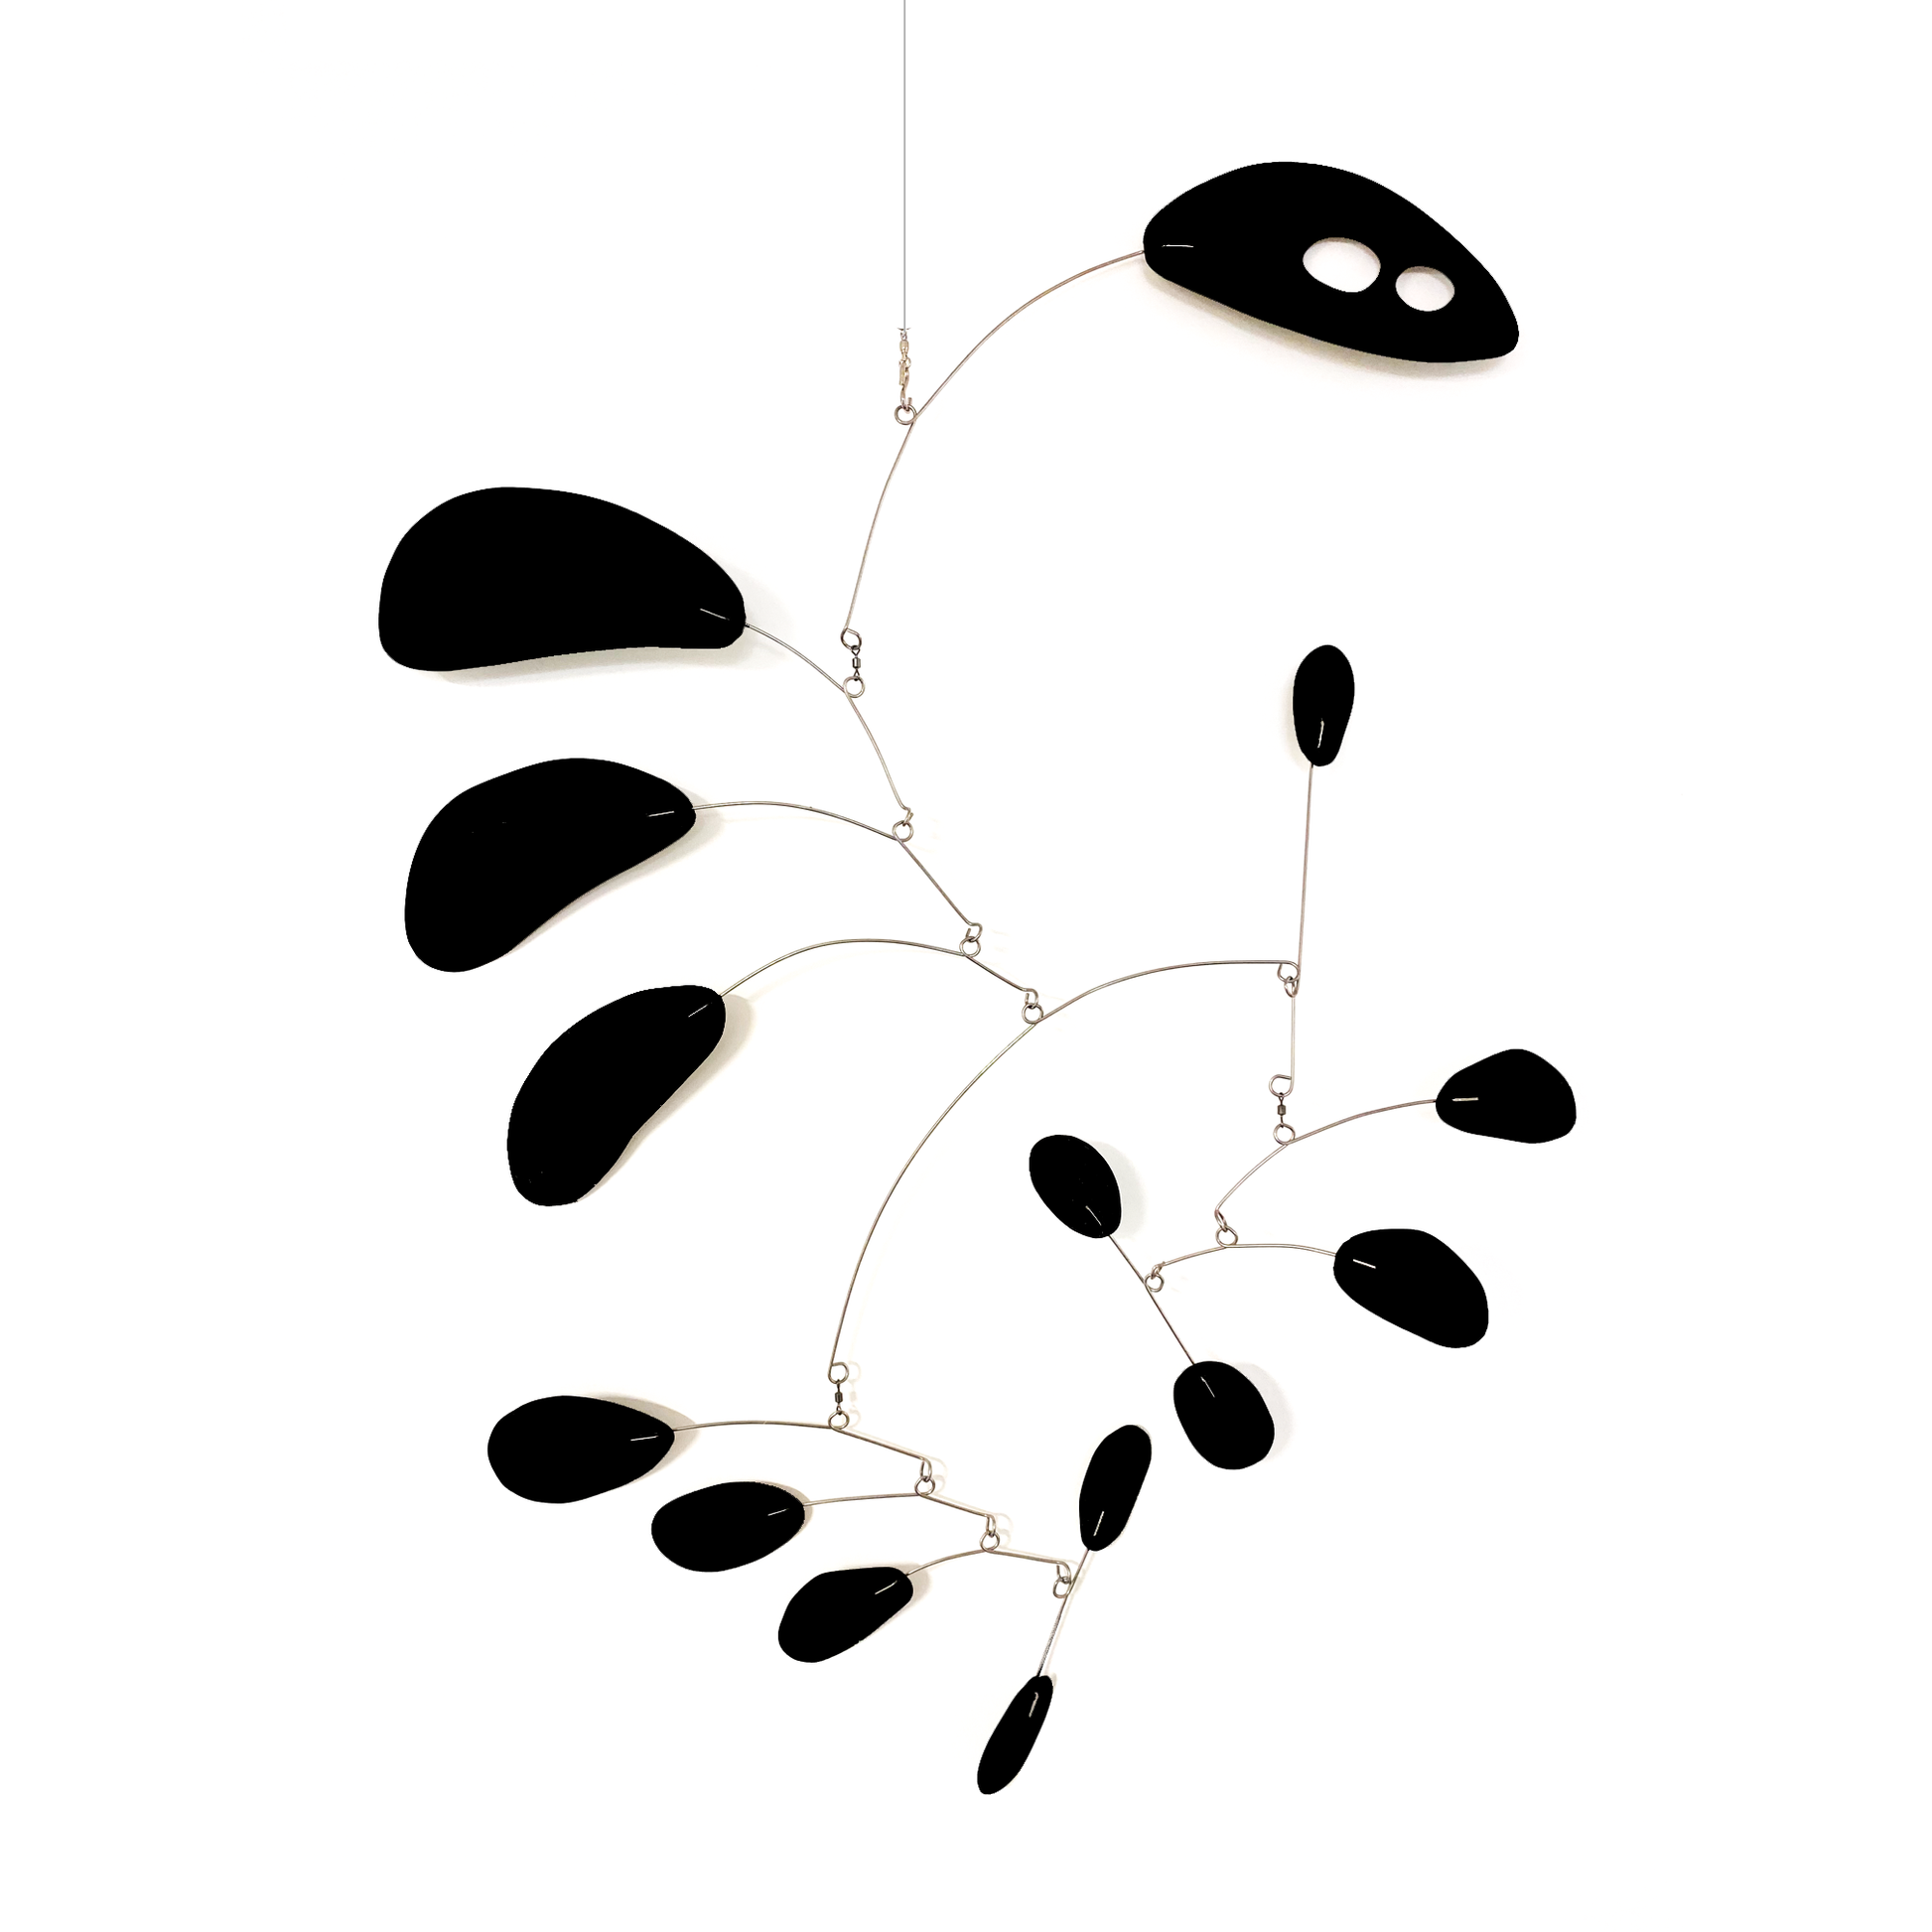 CoolCat mid century modern inspired hanging kinetic art mobile in all black by AtomicMobiles.com